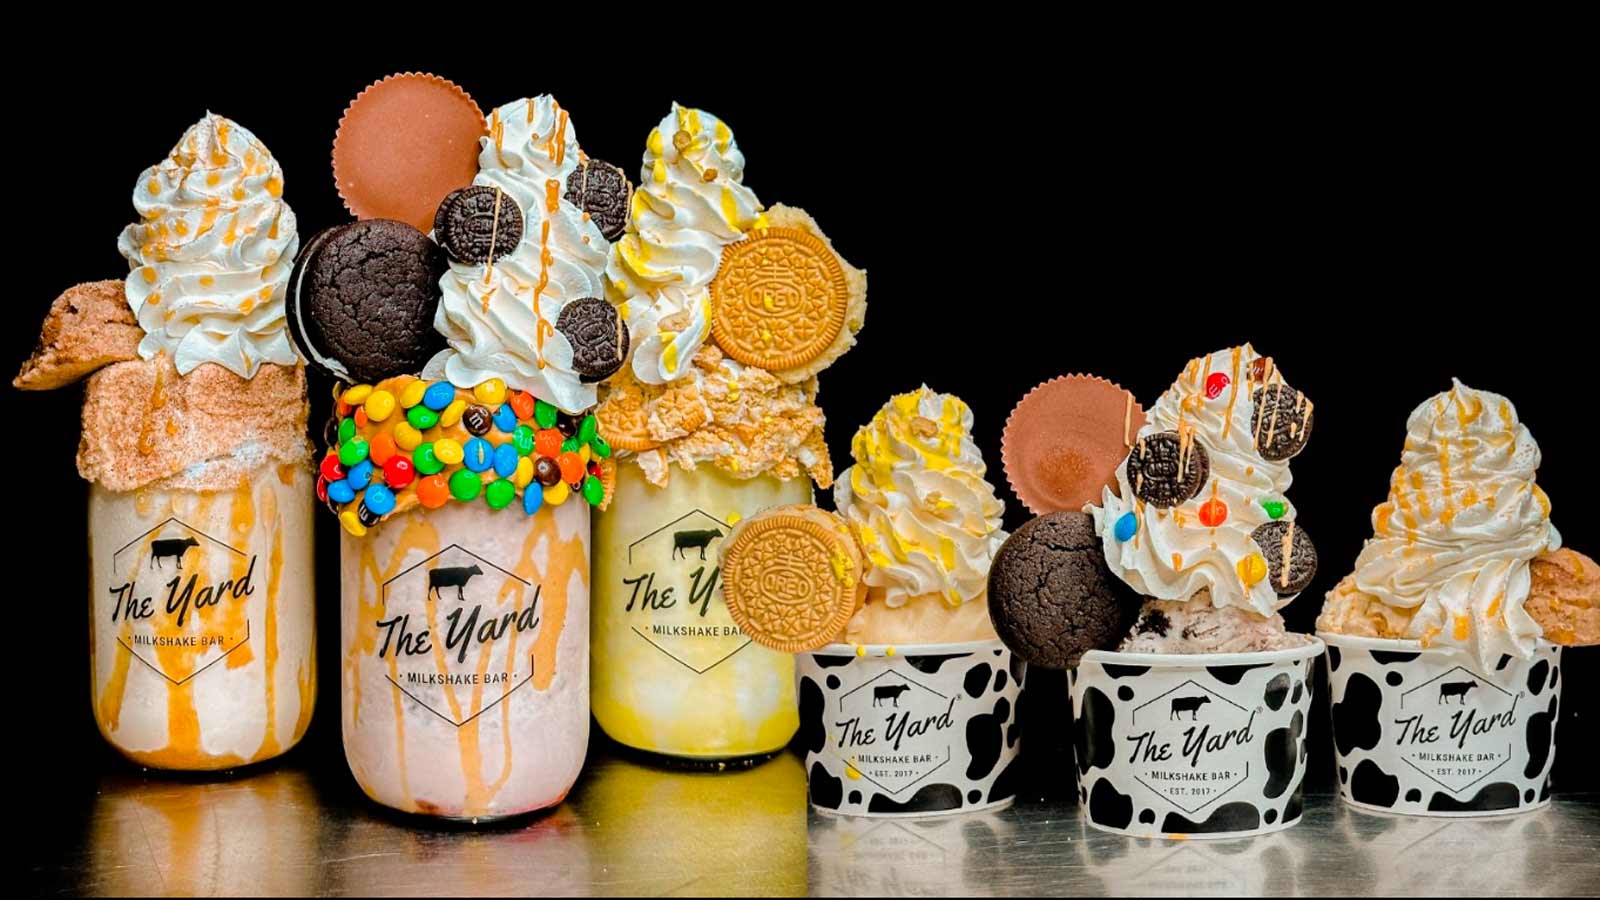 The Yard Milkshake Bar recently brought its over-the-top chilly treats to Glendale, Arizona, and pl...